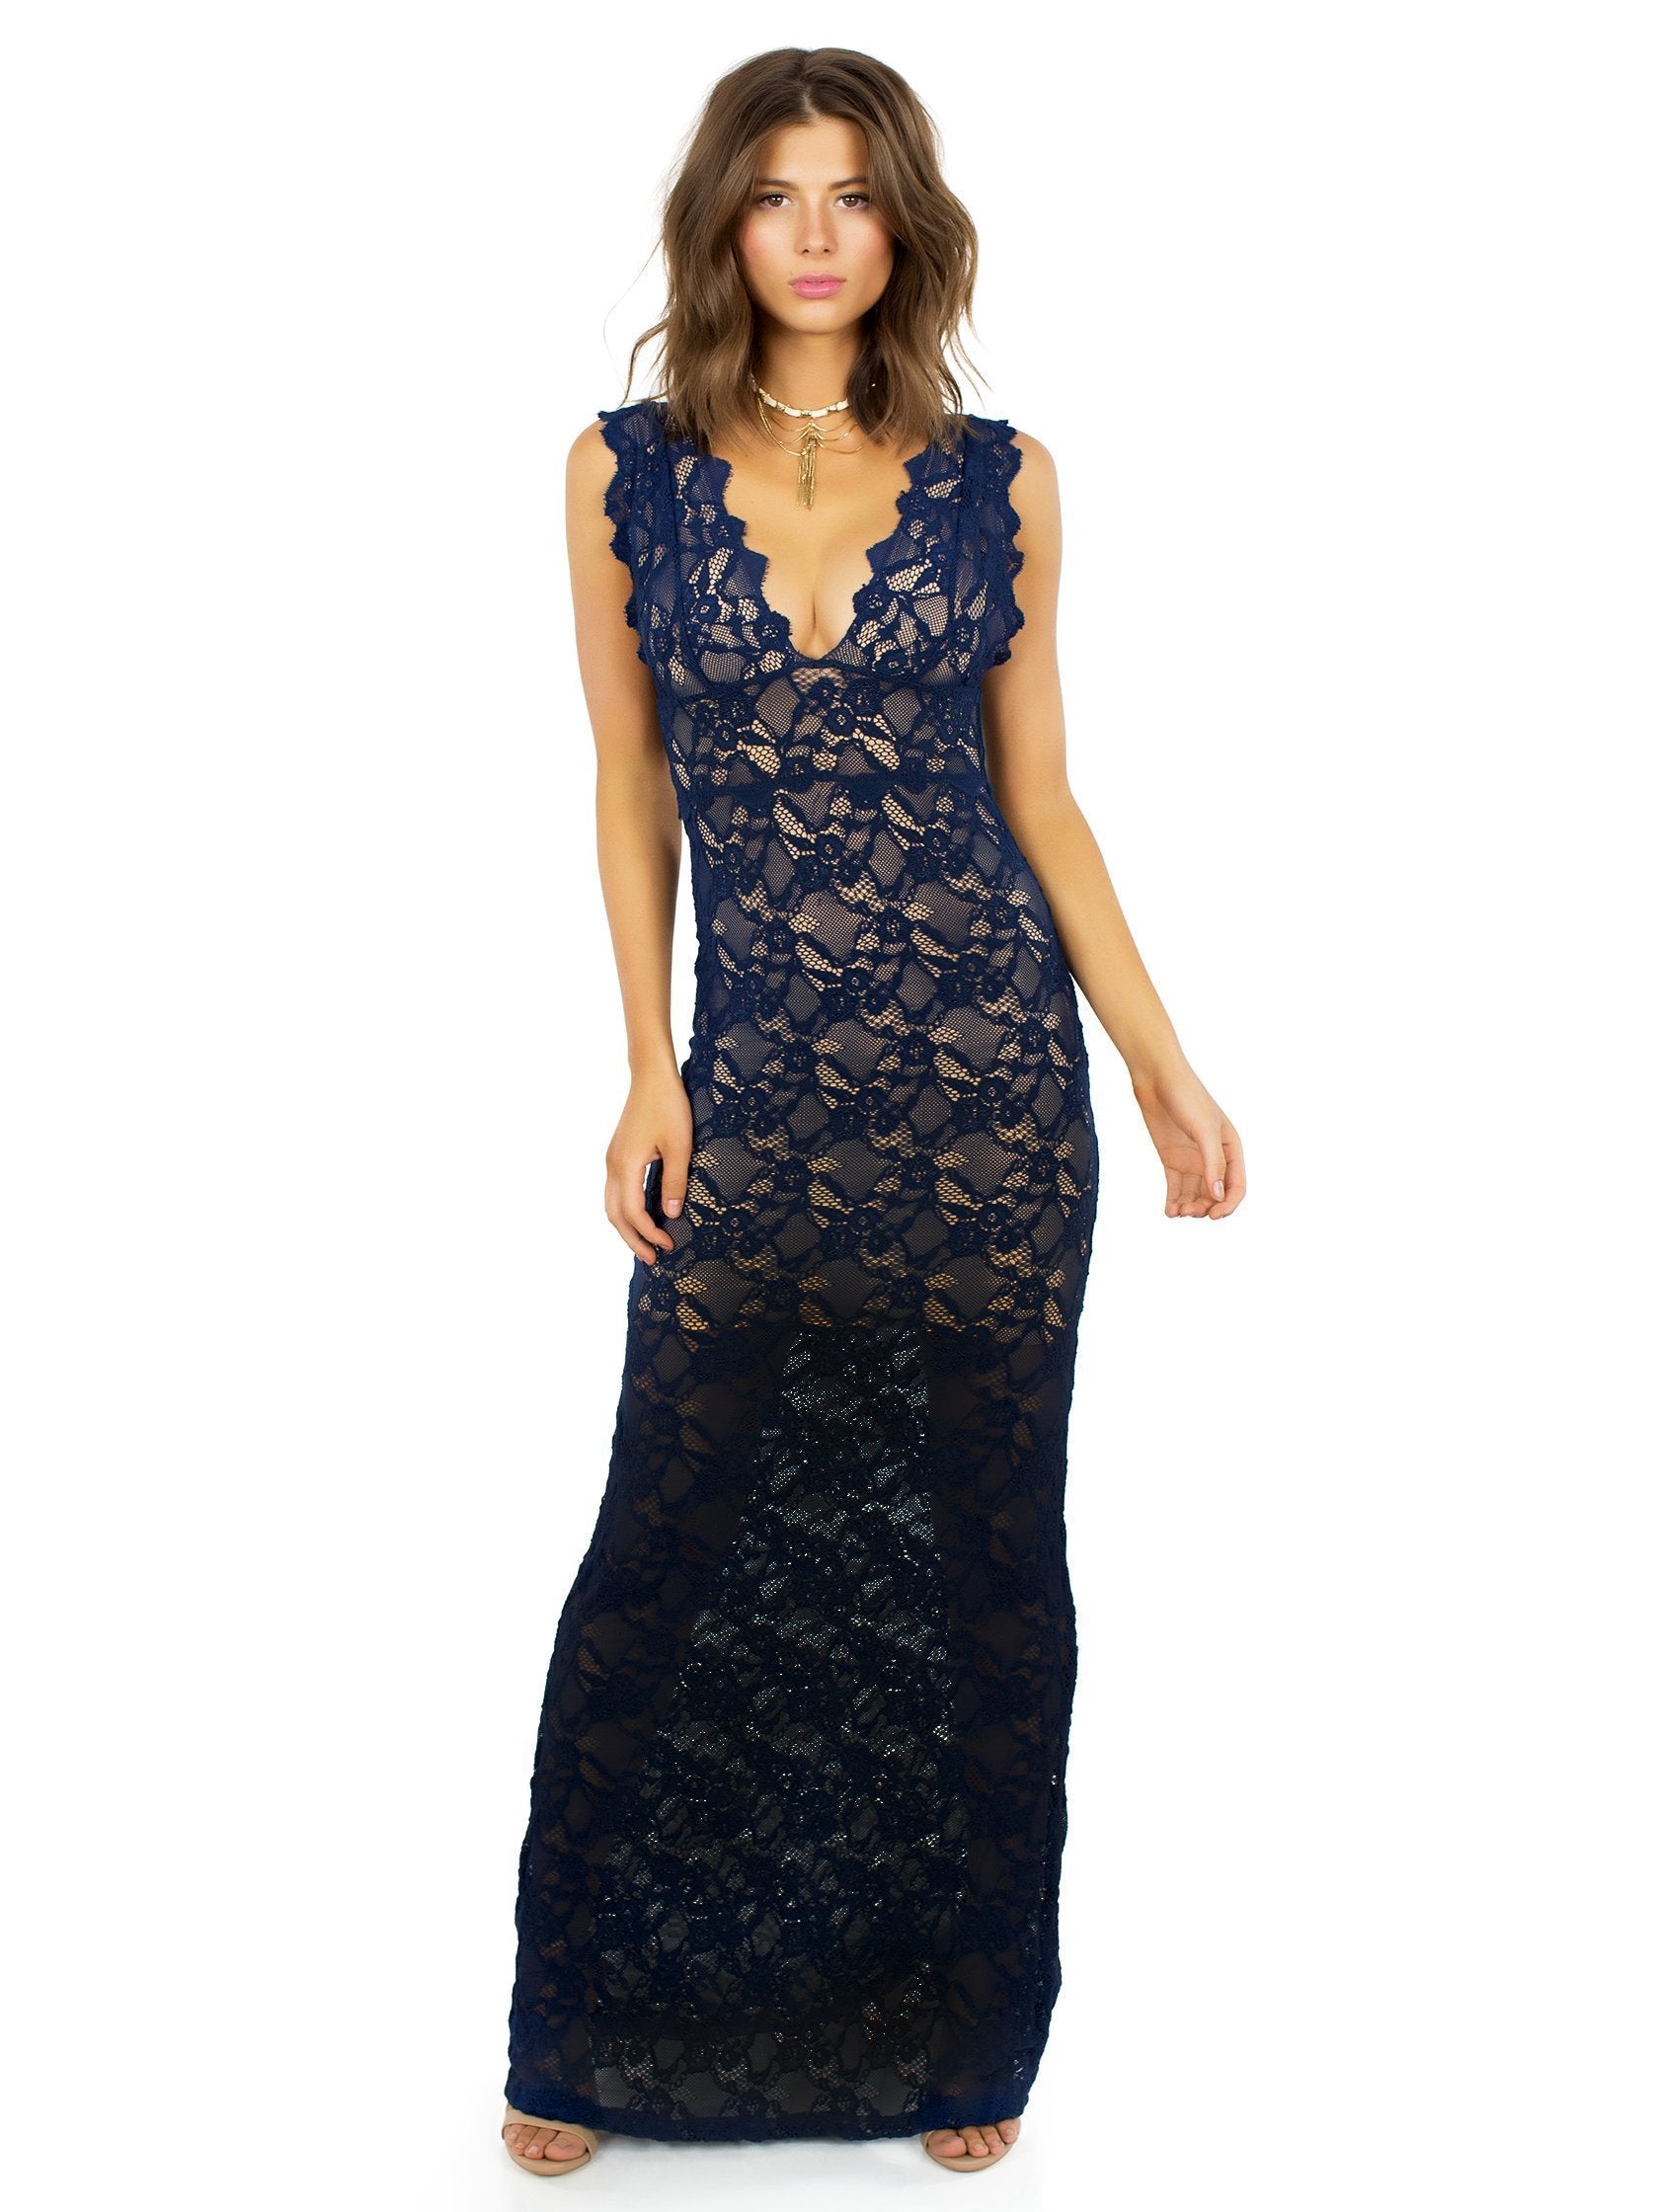 Girl outfit in a dress rental from Nightcap Clothing called Perfect Plunge Maxi Dress